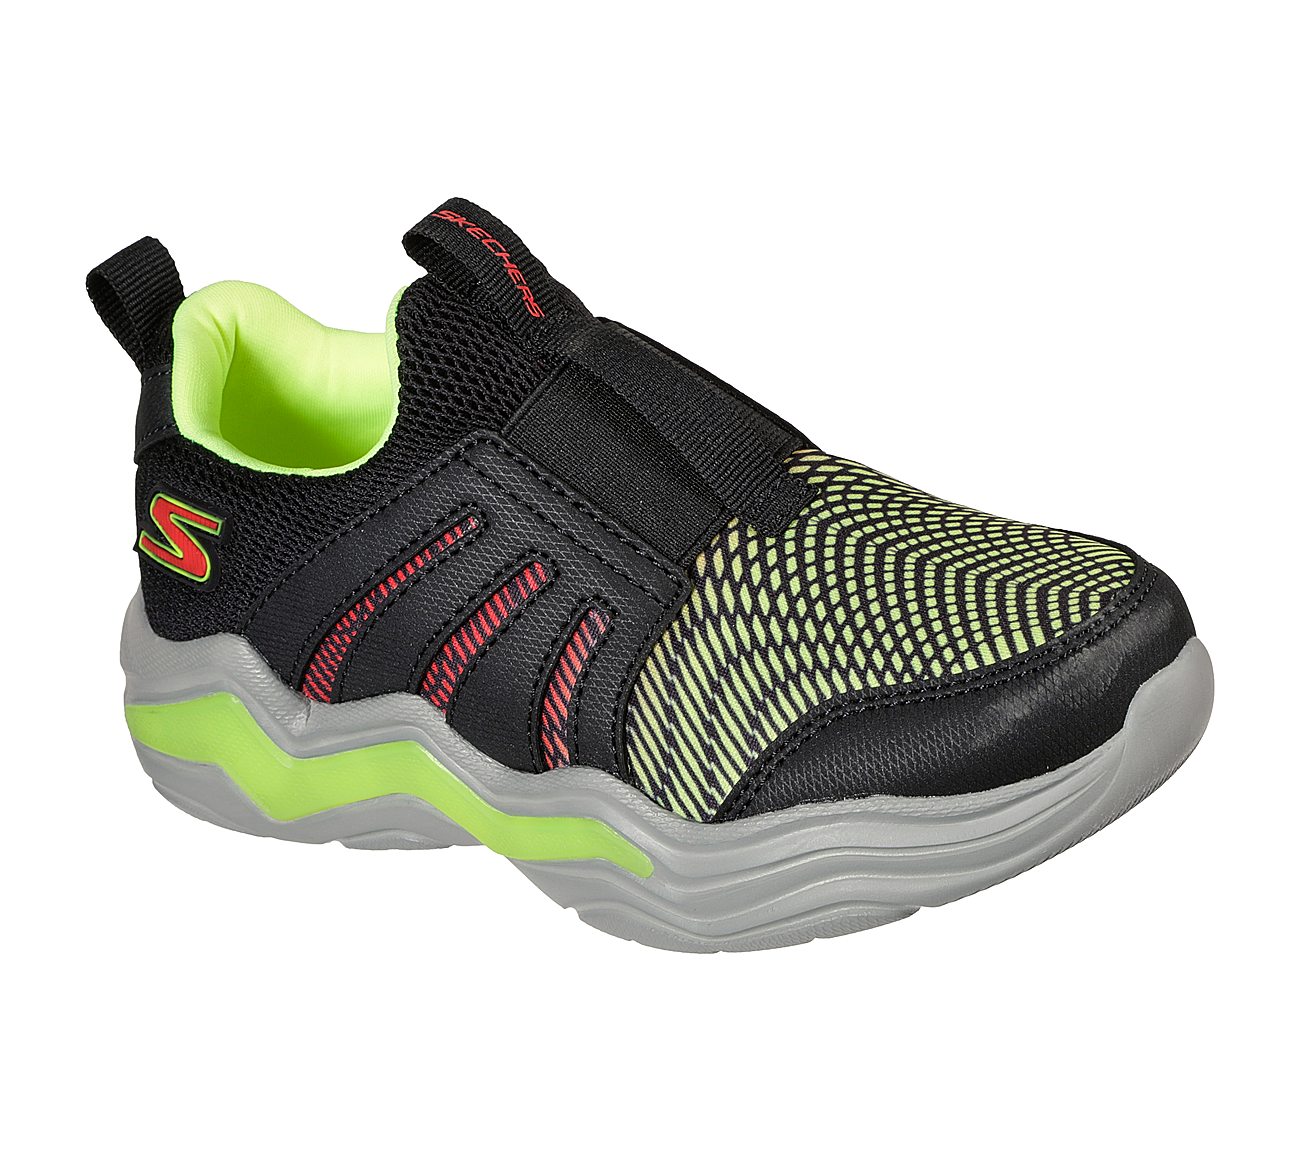 ERUPTERS IV - ZANDOR, BLACK/LIME Footwear Lateral View